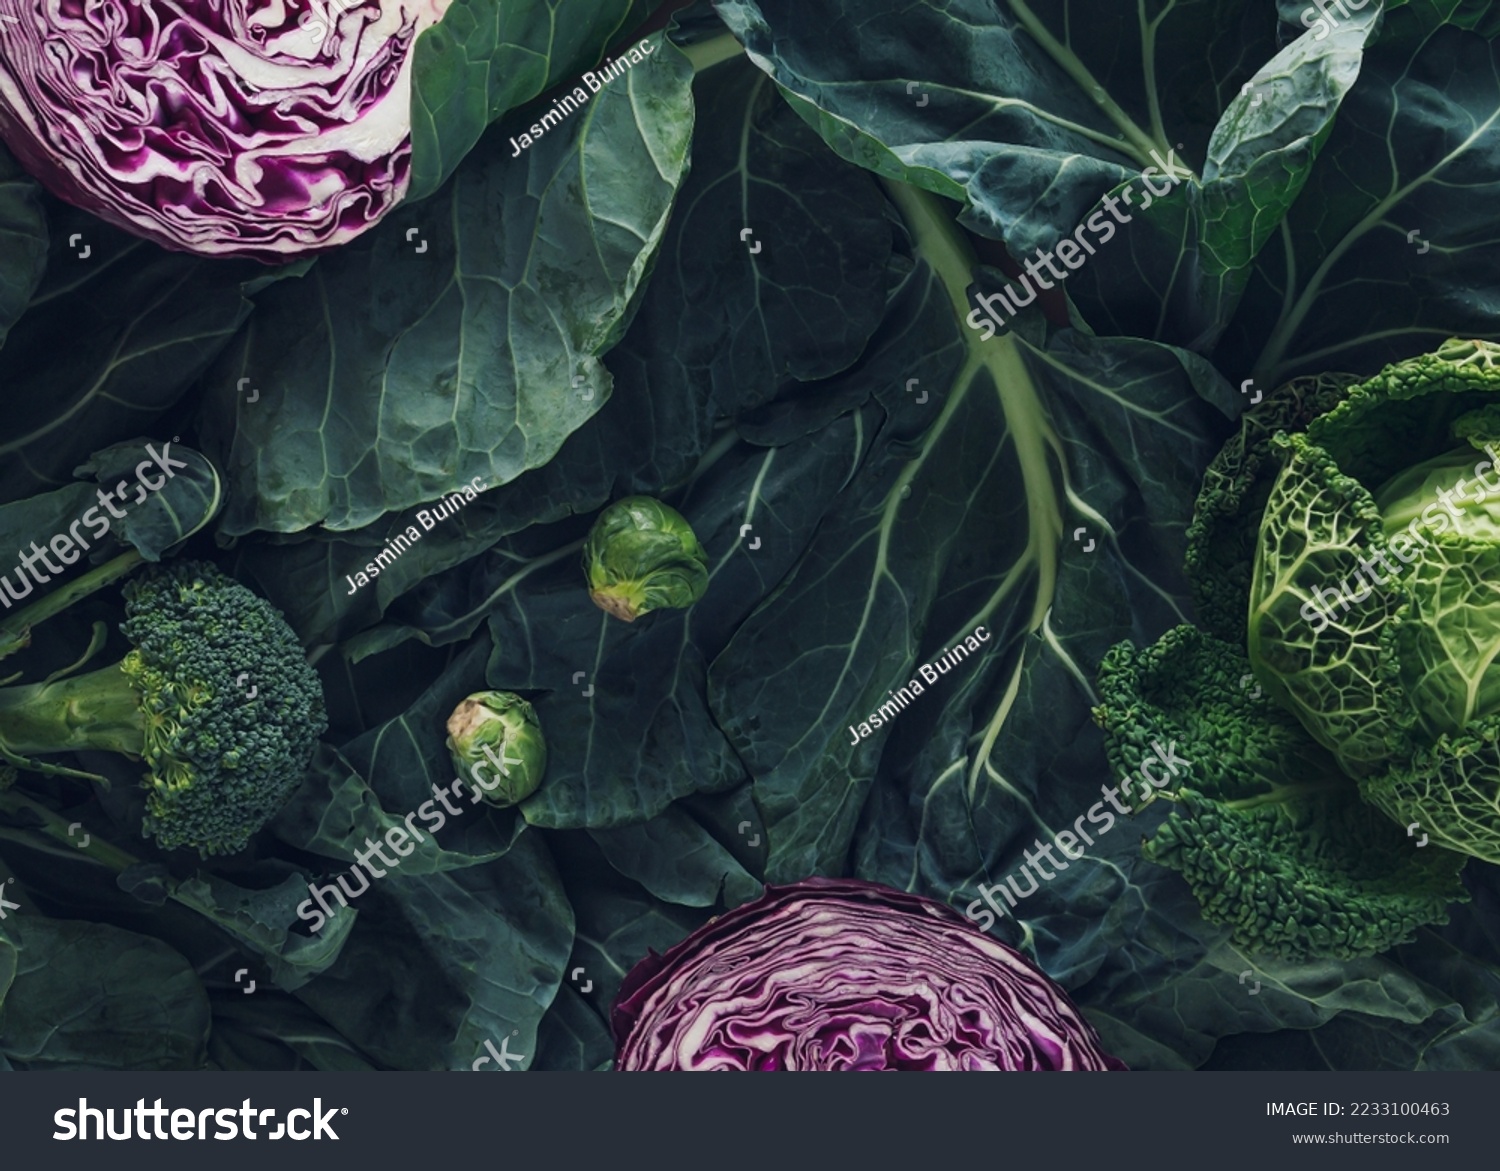 Winter vegetables high in antioxidants, minerals and vitamins: greens, broccoli, brussels sprouts, red cabbage and kale. Flat lay. Garden food concept. Agricultural products. Top view. Dark background #2233100463